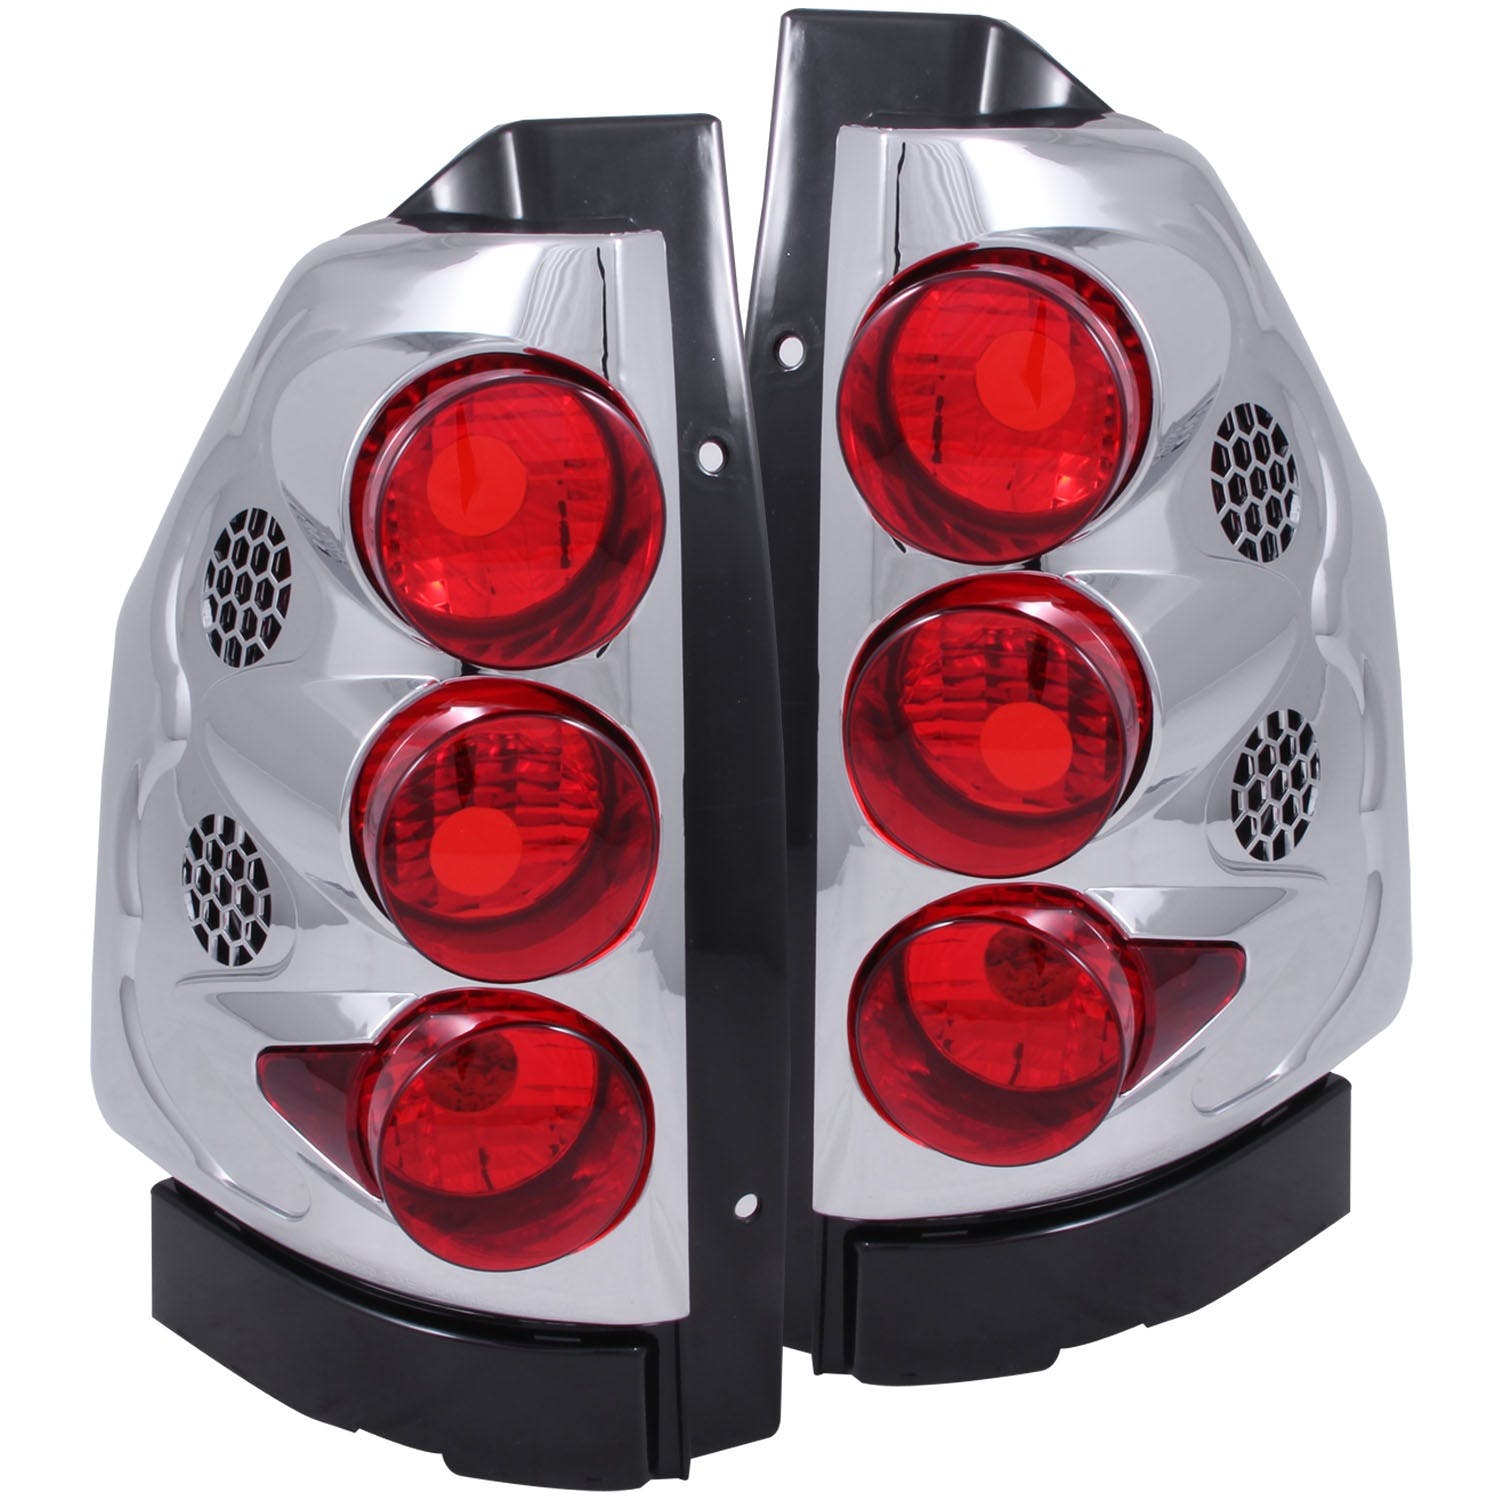 AnzoUSA 211091 Taillights Chrome